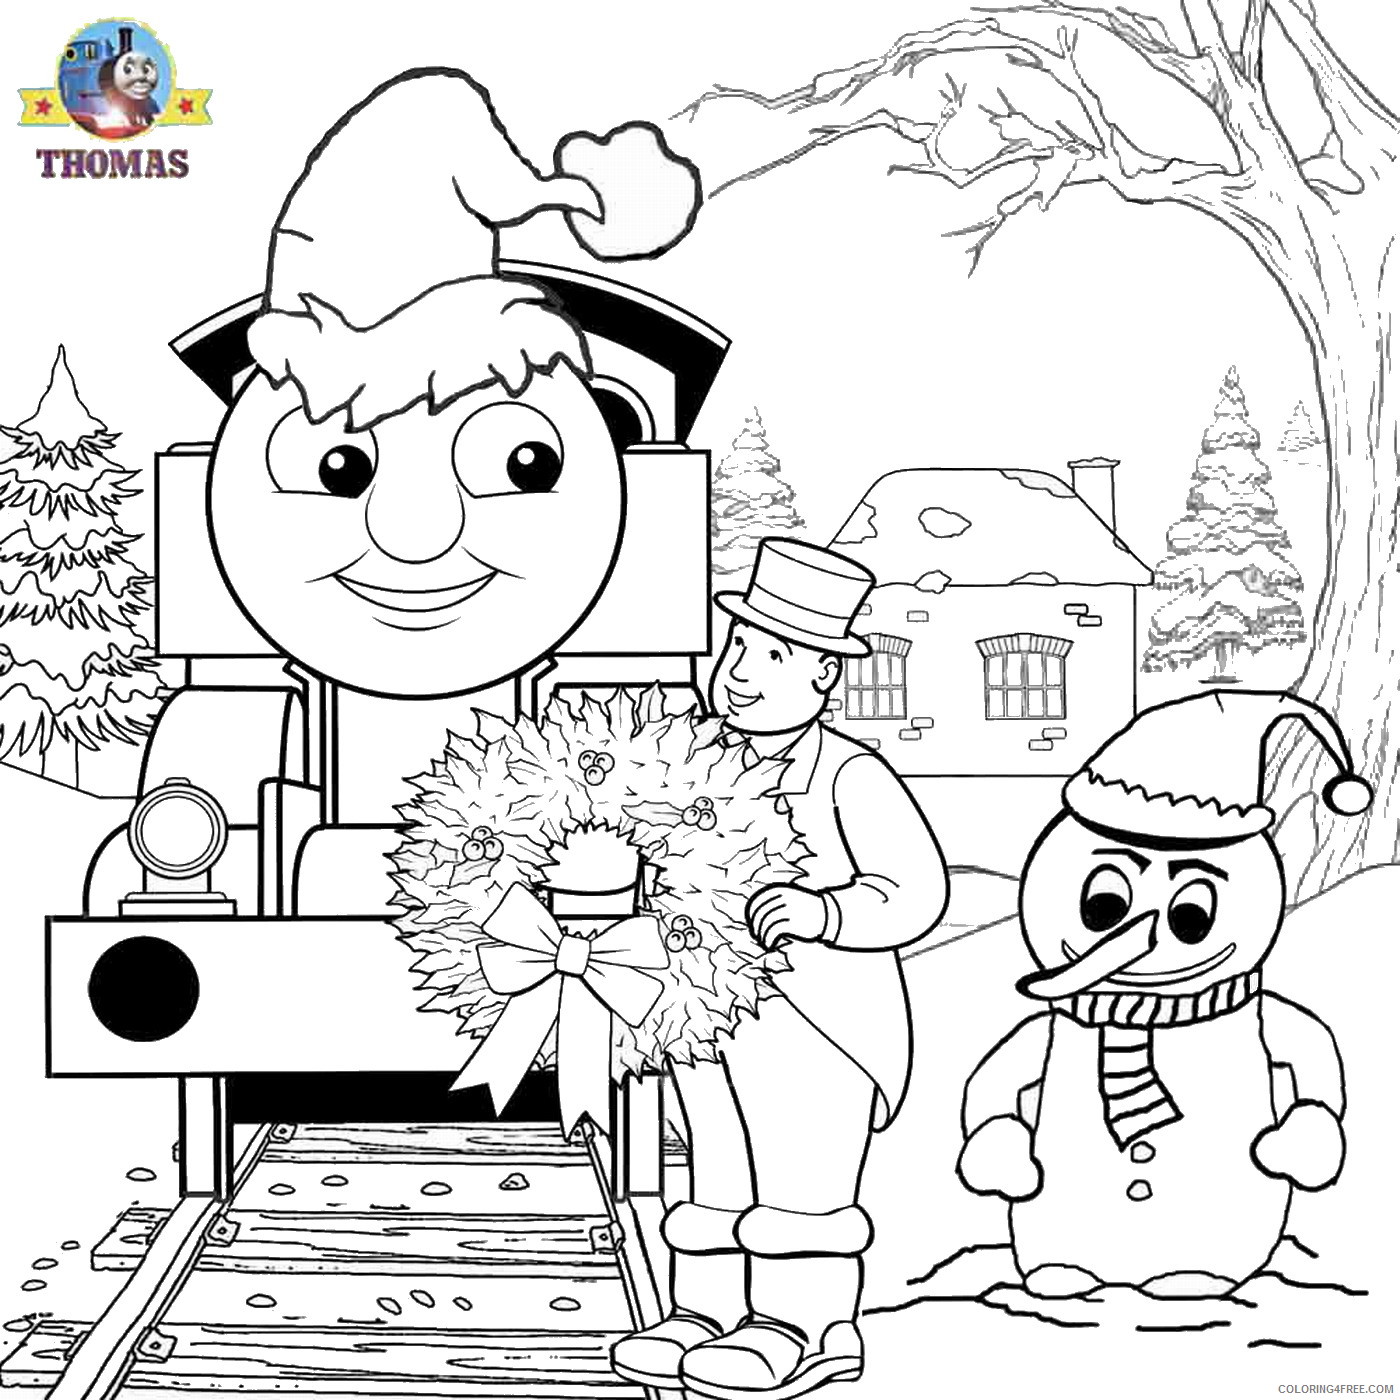 Thomas and Friends Coloring Pages Cartoons thomas_tank_engine_cl19 Printable 2020 6524 Coloring4free